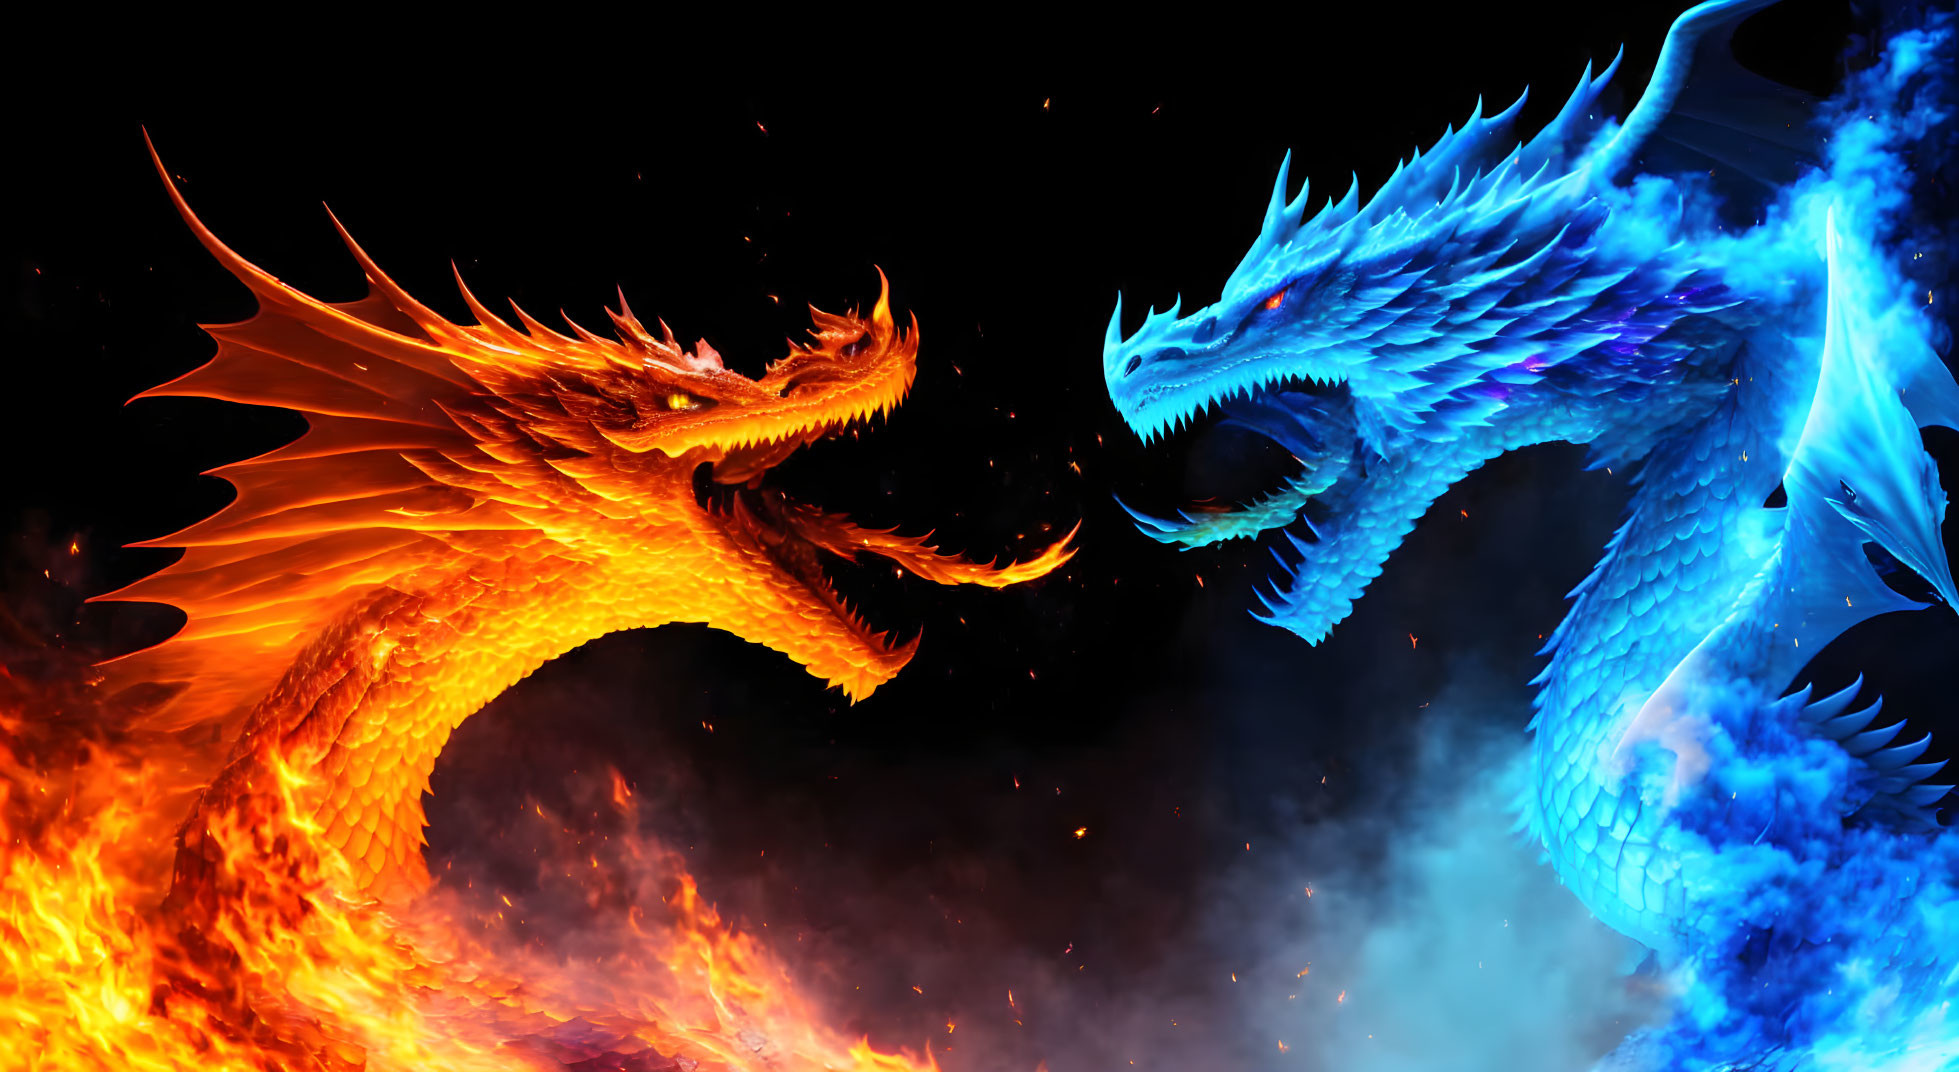 Majestic orange and blue dragons in fiery confrontation